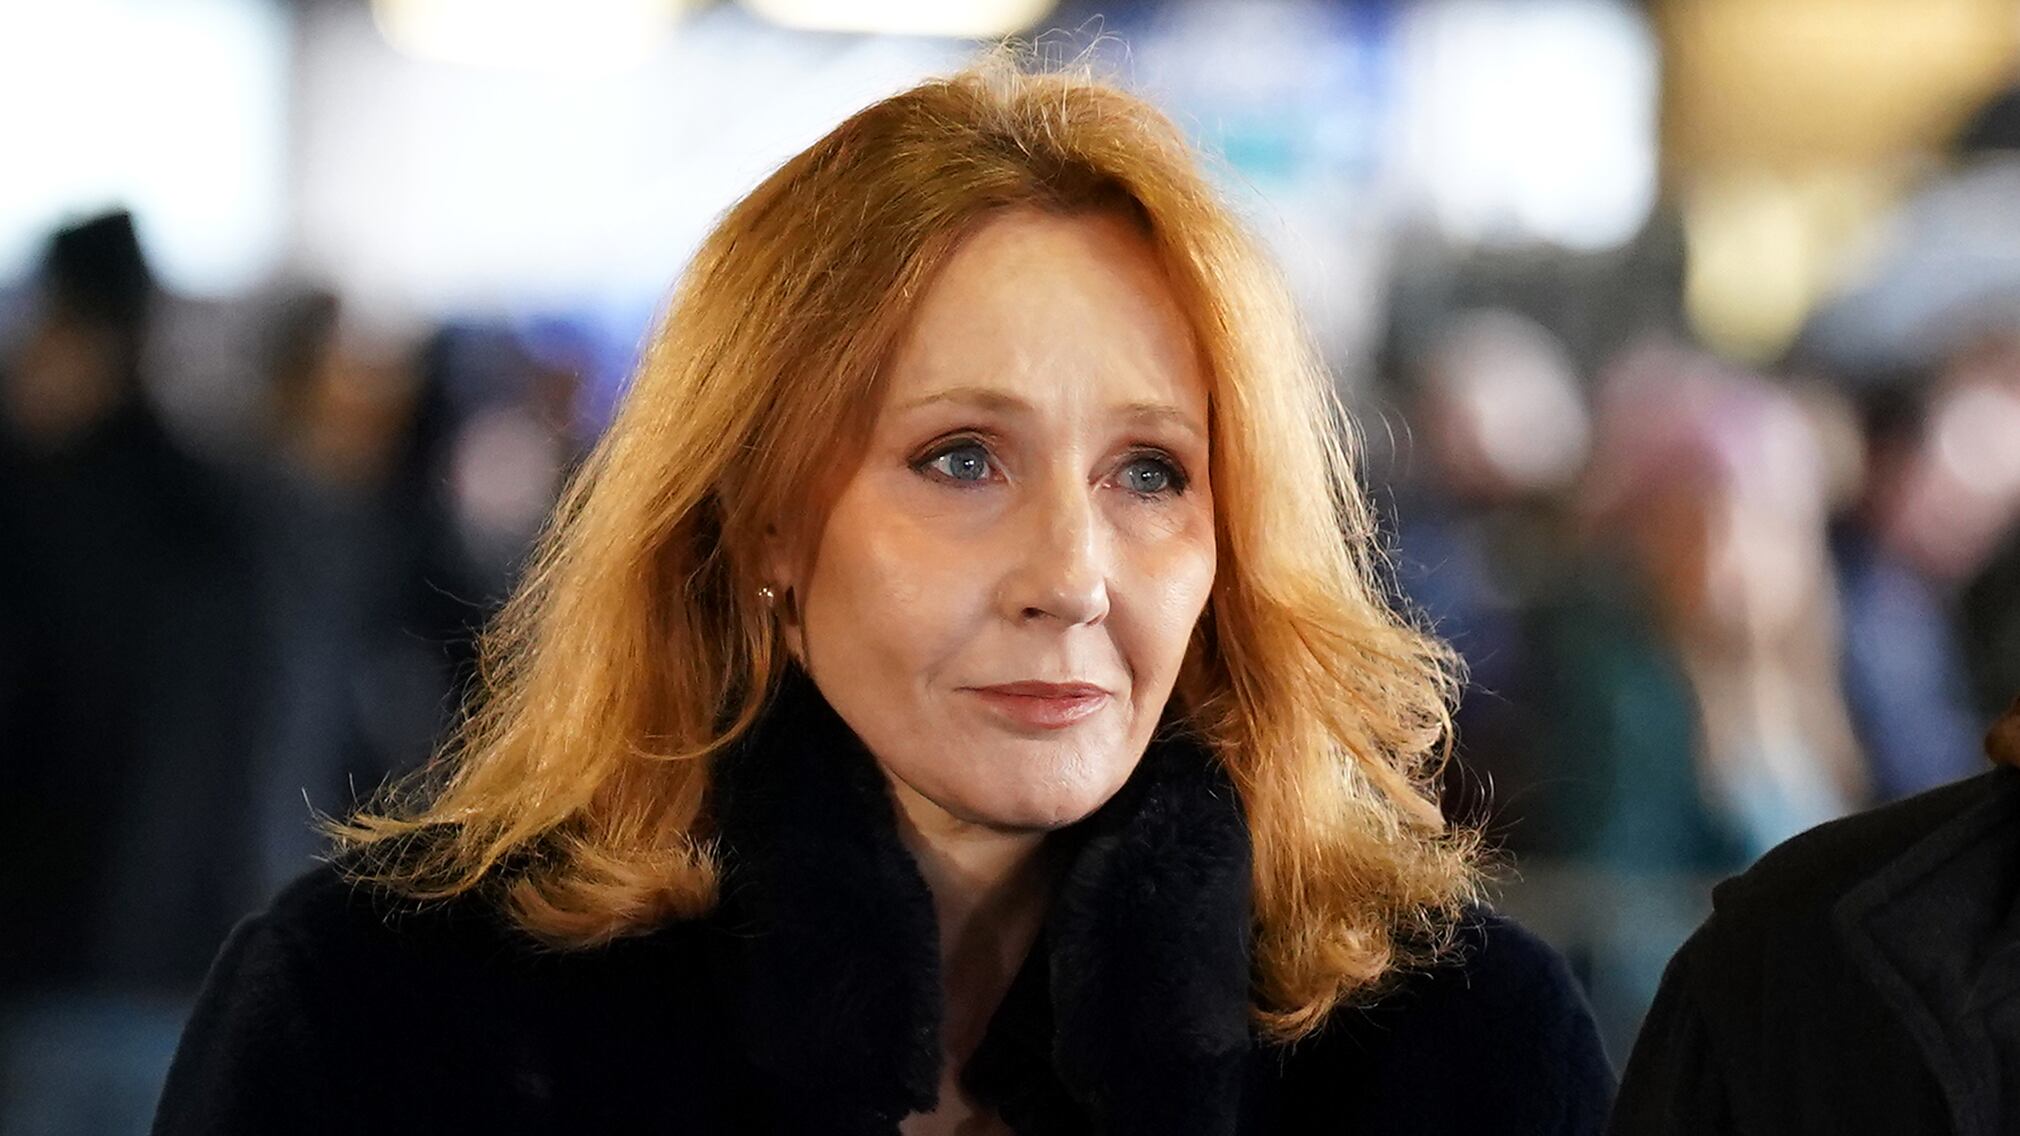 JK Rowling has criticised Labour leader Sir Keir Starmer